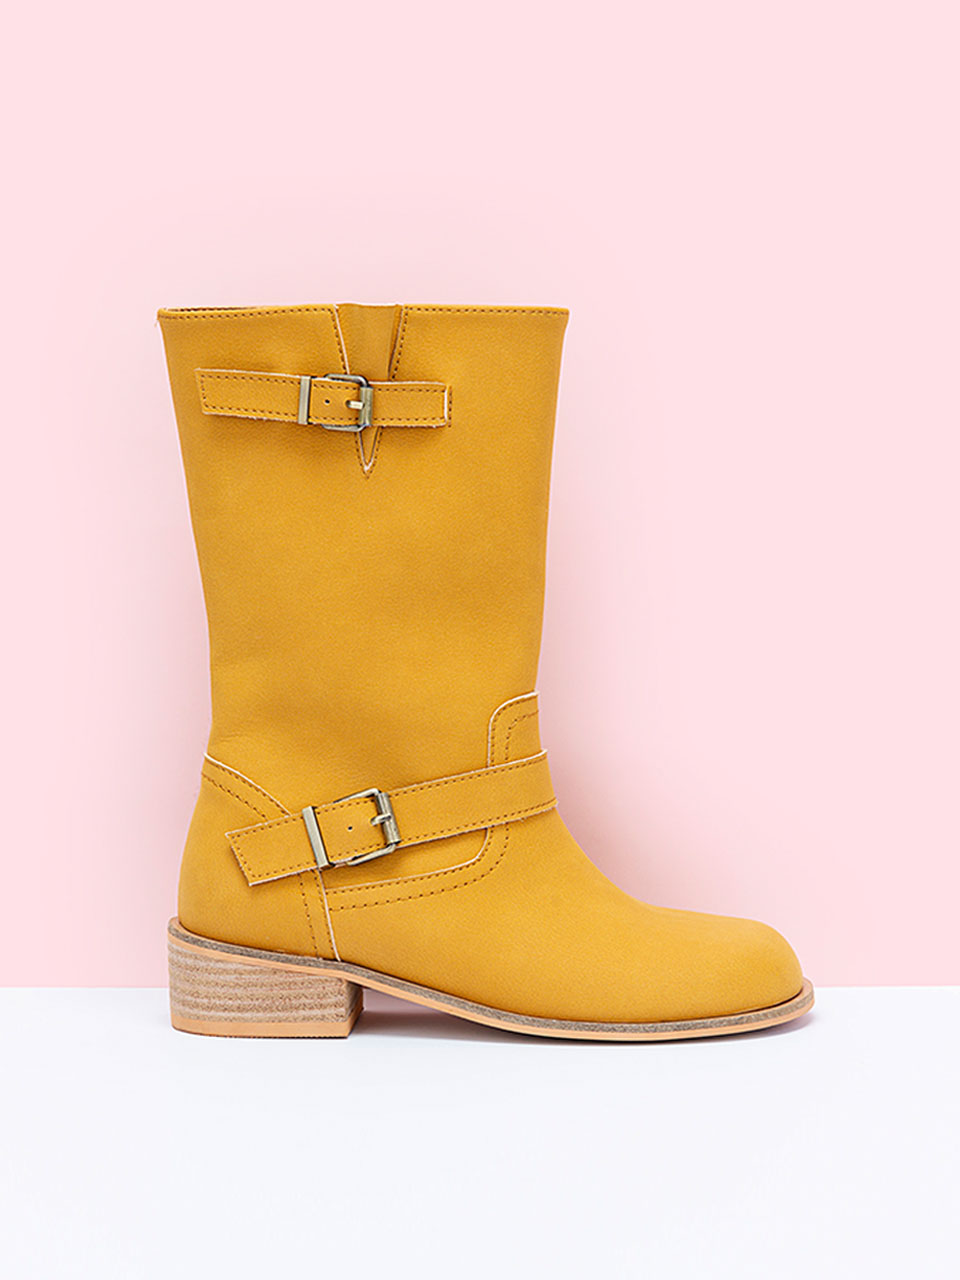 Buckle Middle Boots (Mustard)